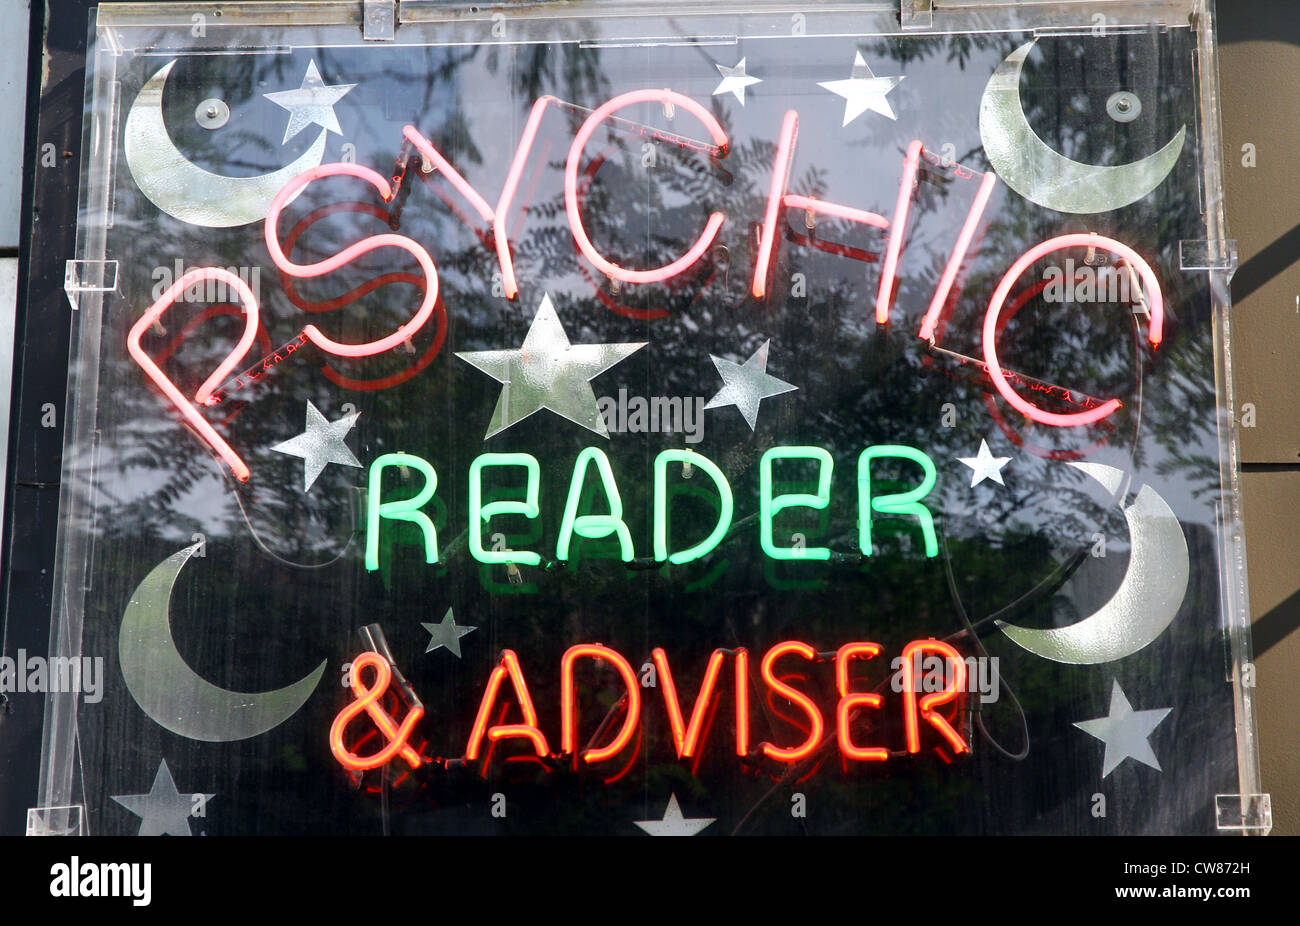 A sign of a business of a psychic reader Stock Photo